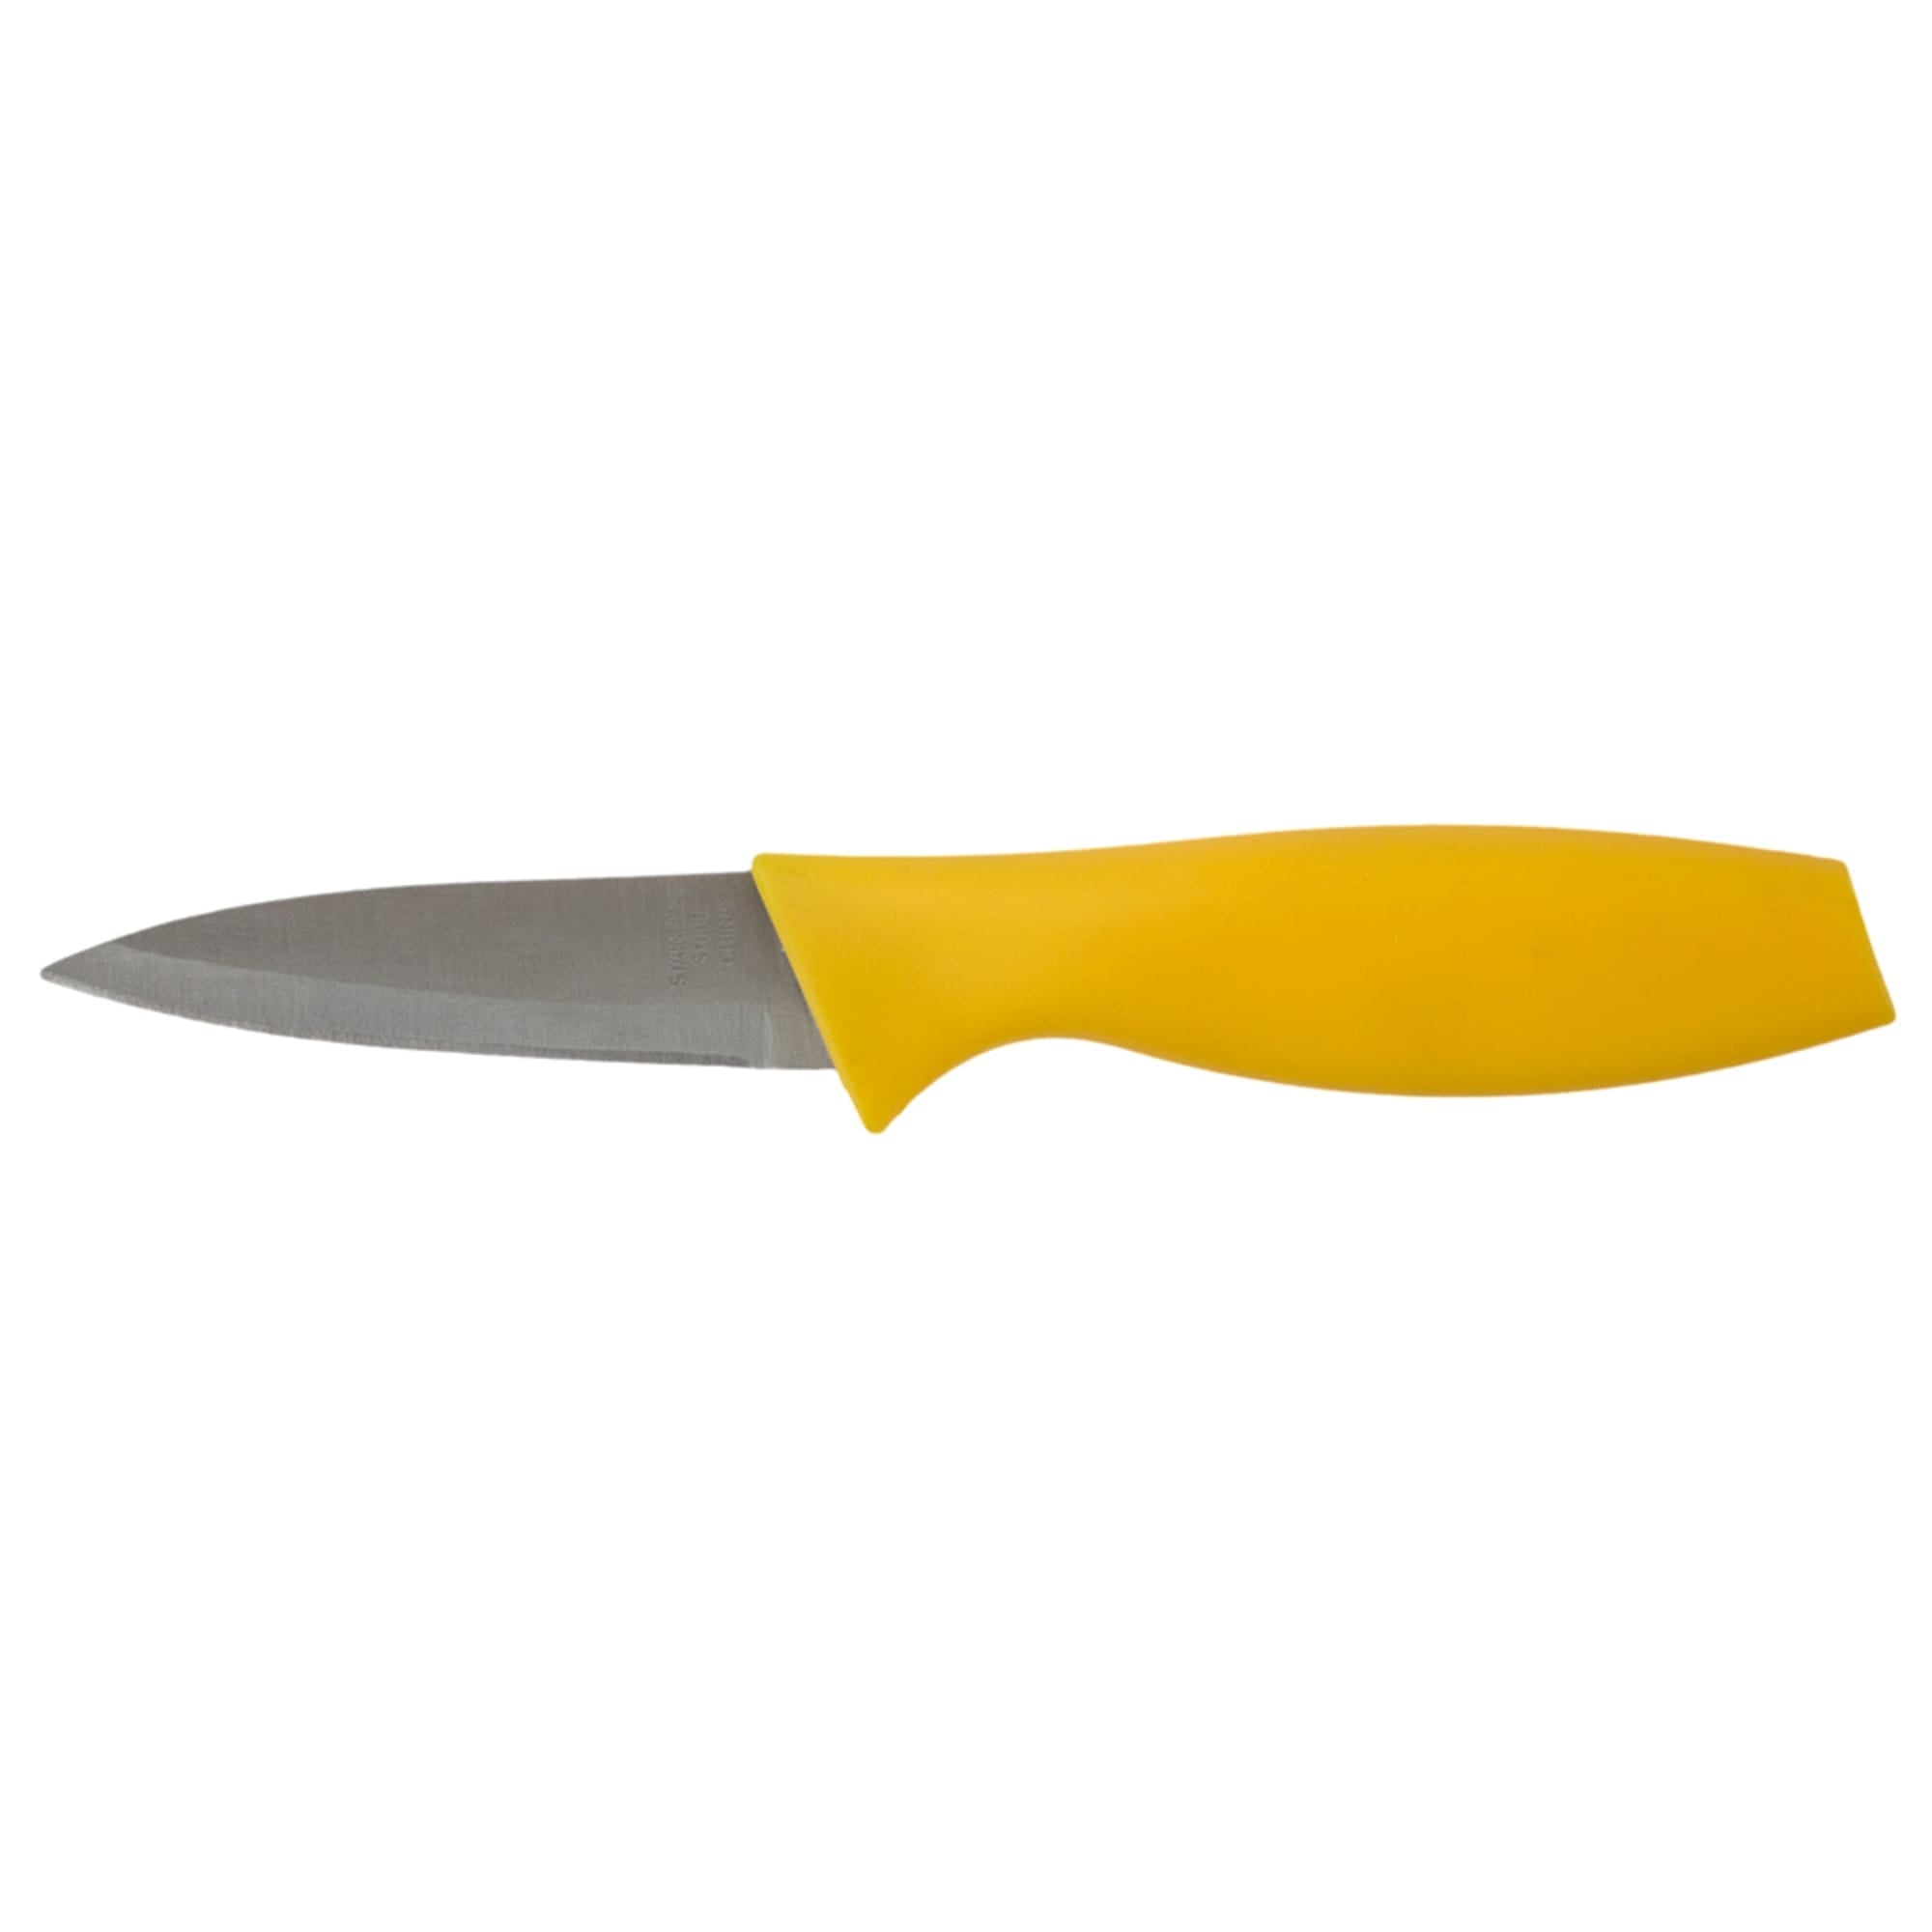 Home Basics 3 Piece Stainless Steel  Knife Set with Colorful Slip Covers $4.00 EACH, CASE PACK OF 12